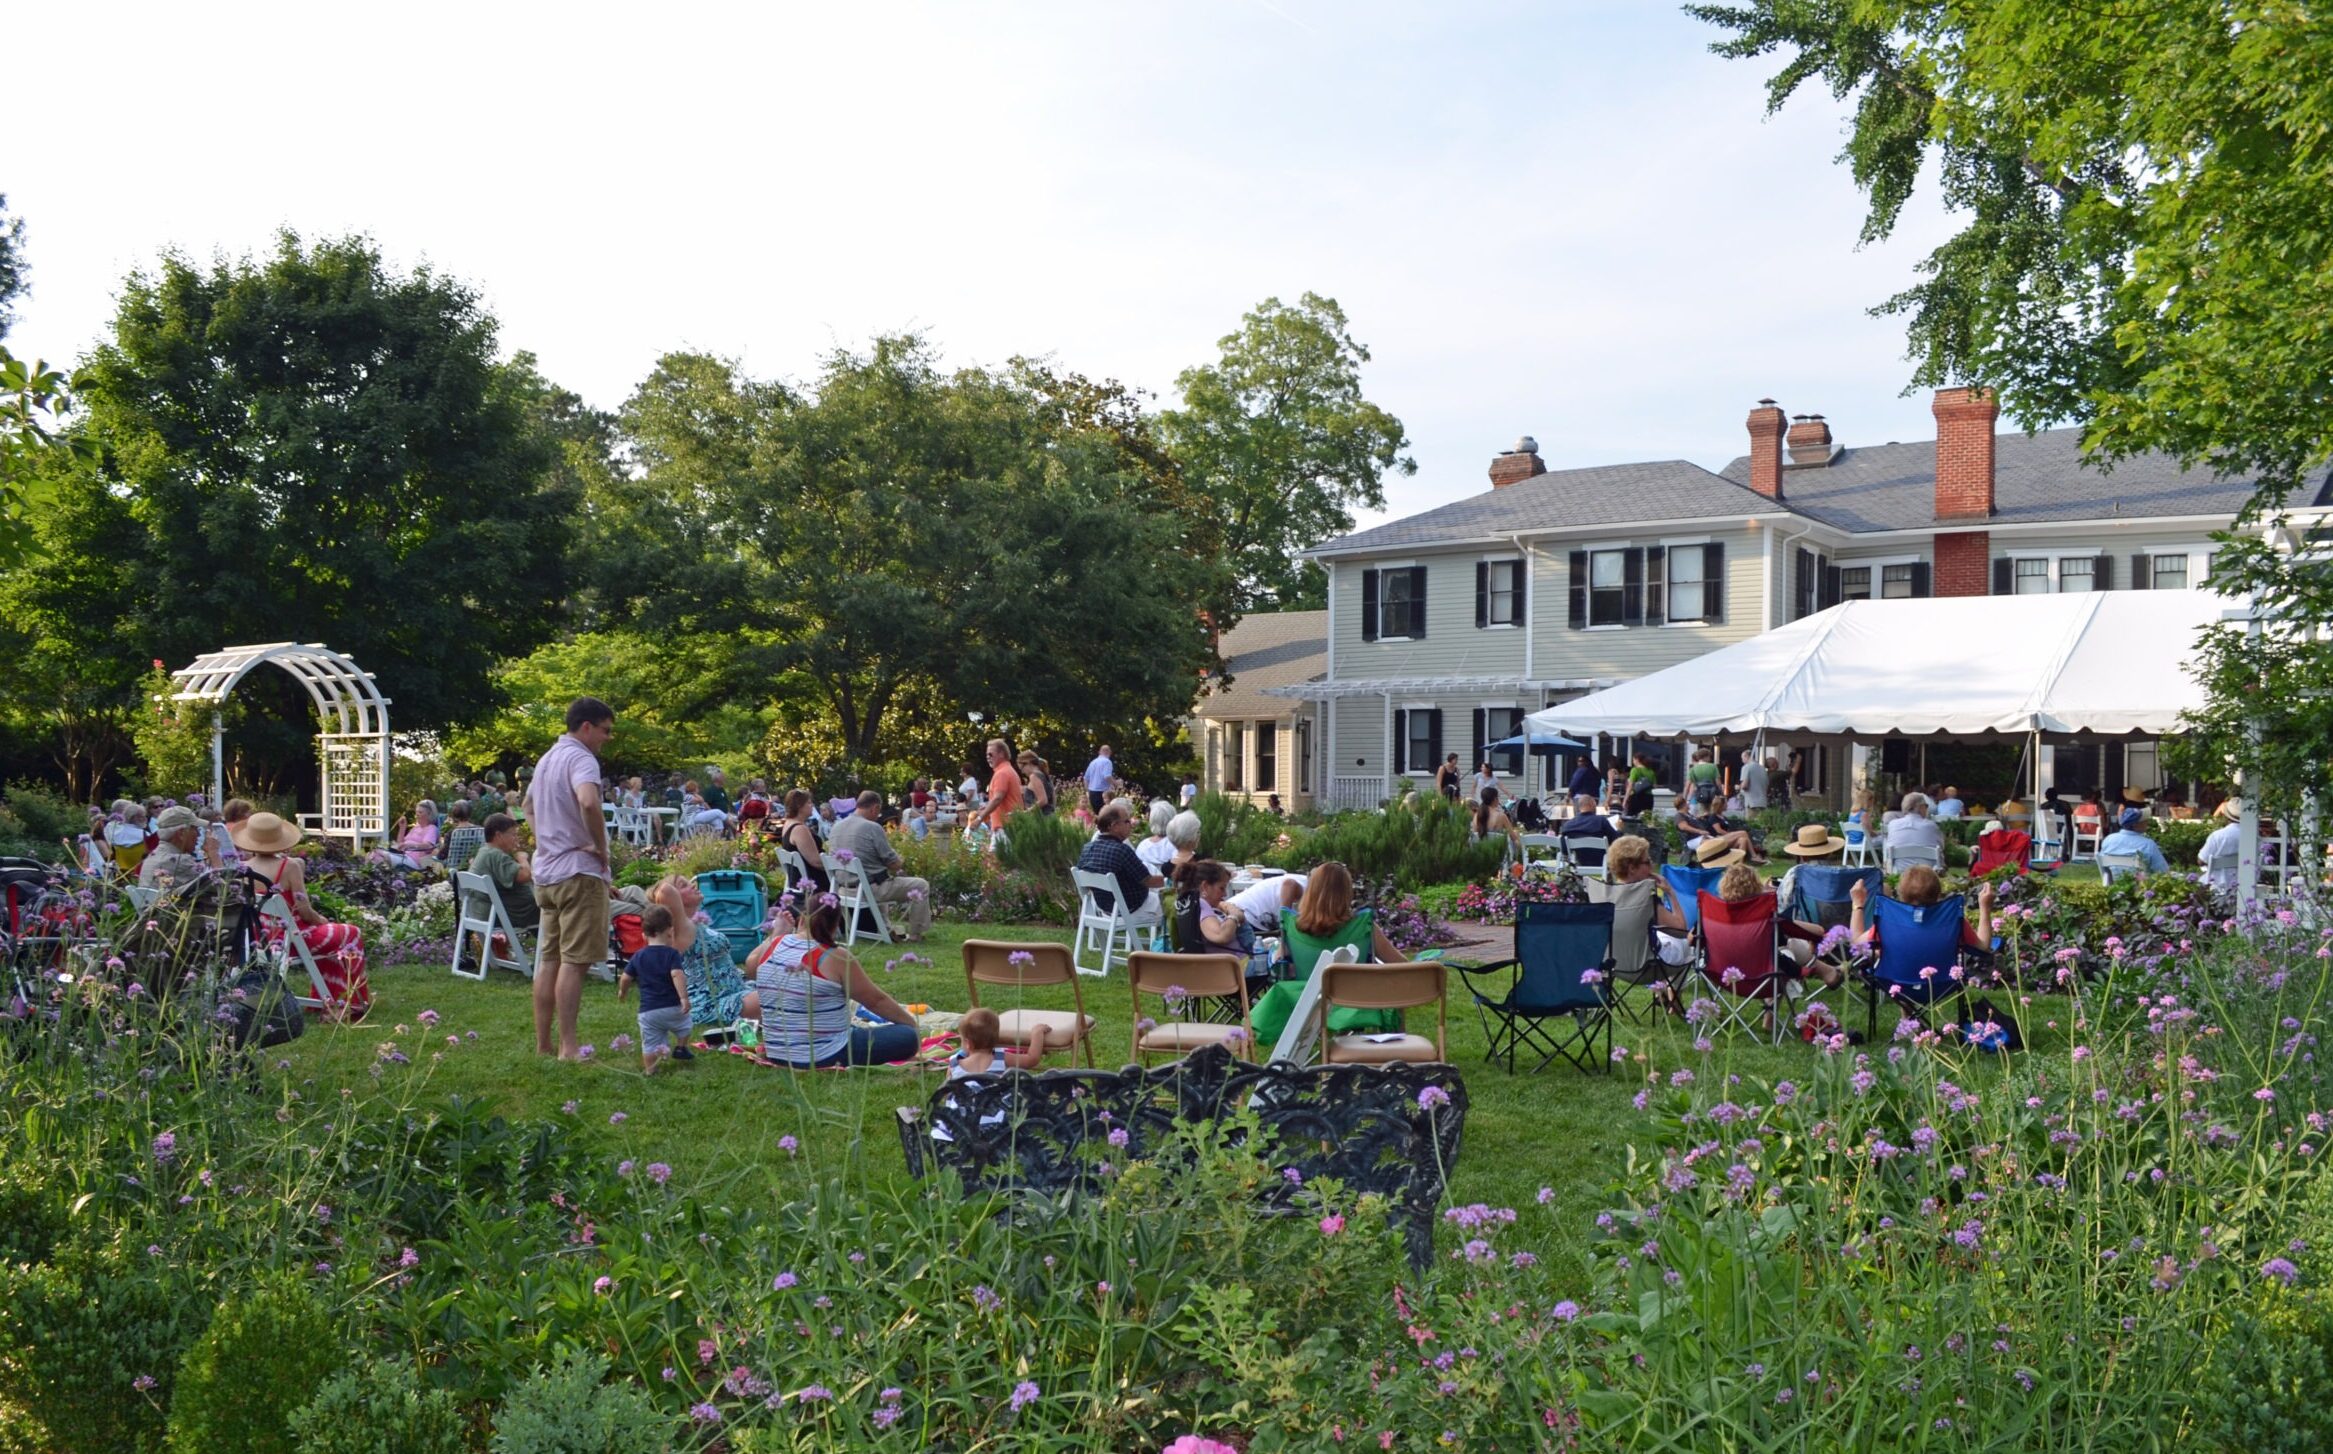 An image of a concert happening outside Bloemendaal House at Lewis Ginter Botanical Garden. People are sitting in the grass, walking around, eating, drinking, and enjoying the music.